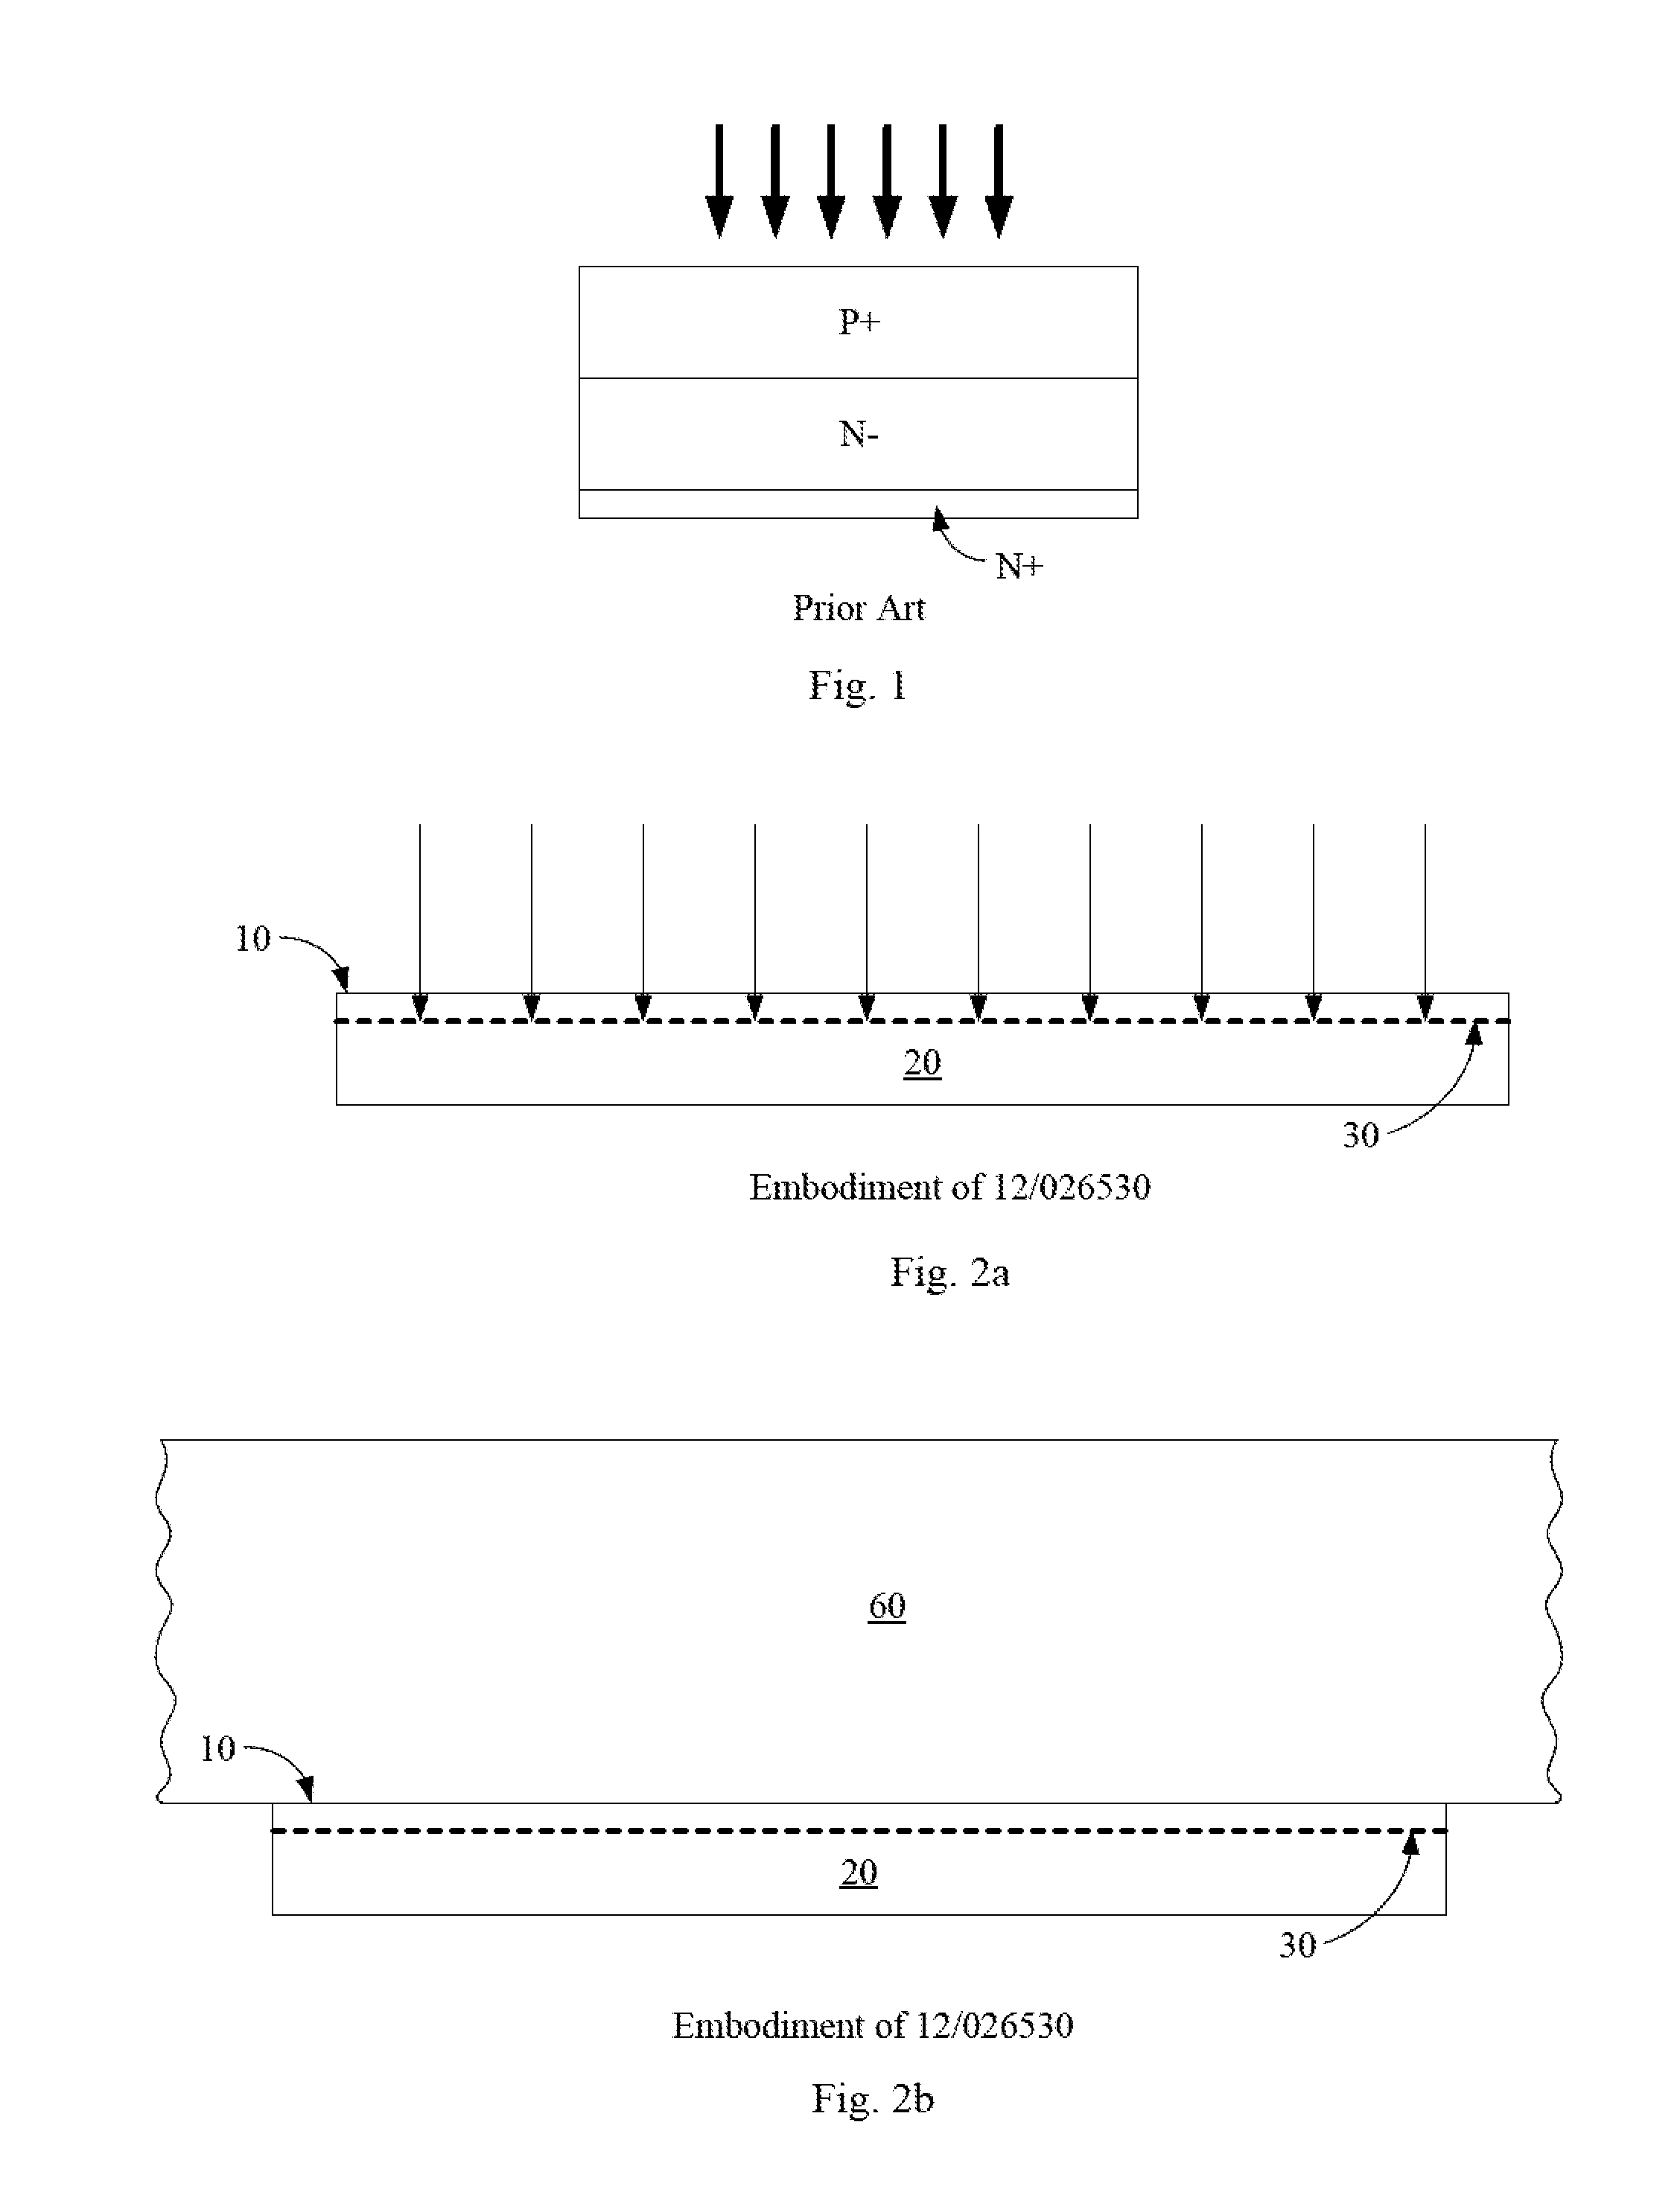 Photovoltaic cell comprising a thin lamina having emitter formed at light-facing and back surfaces